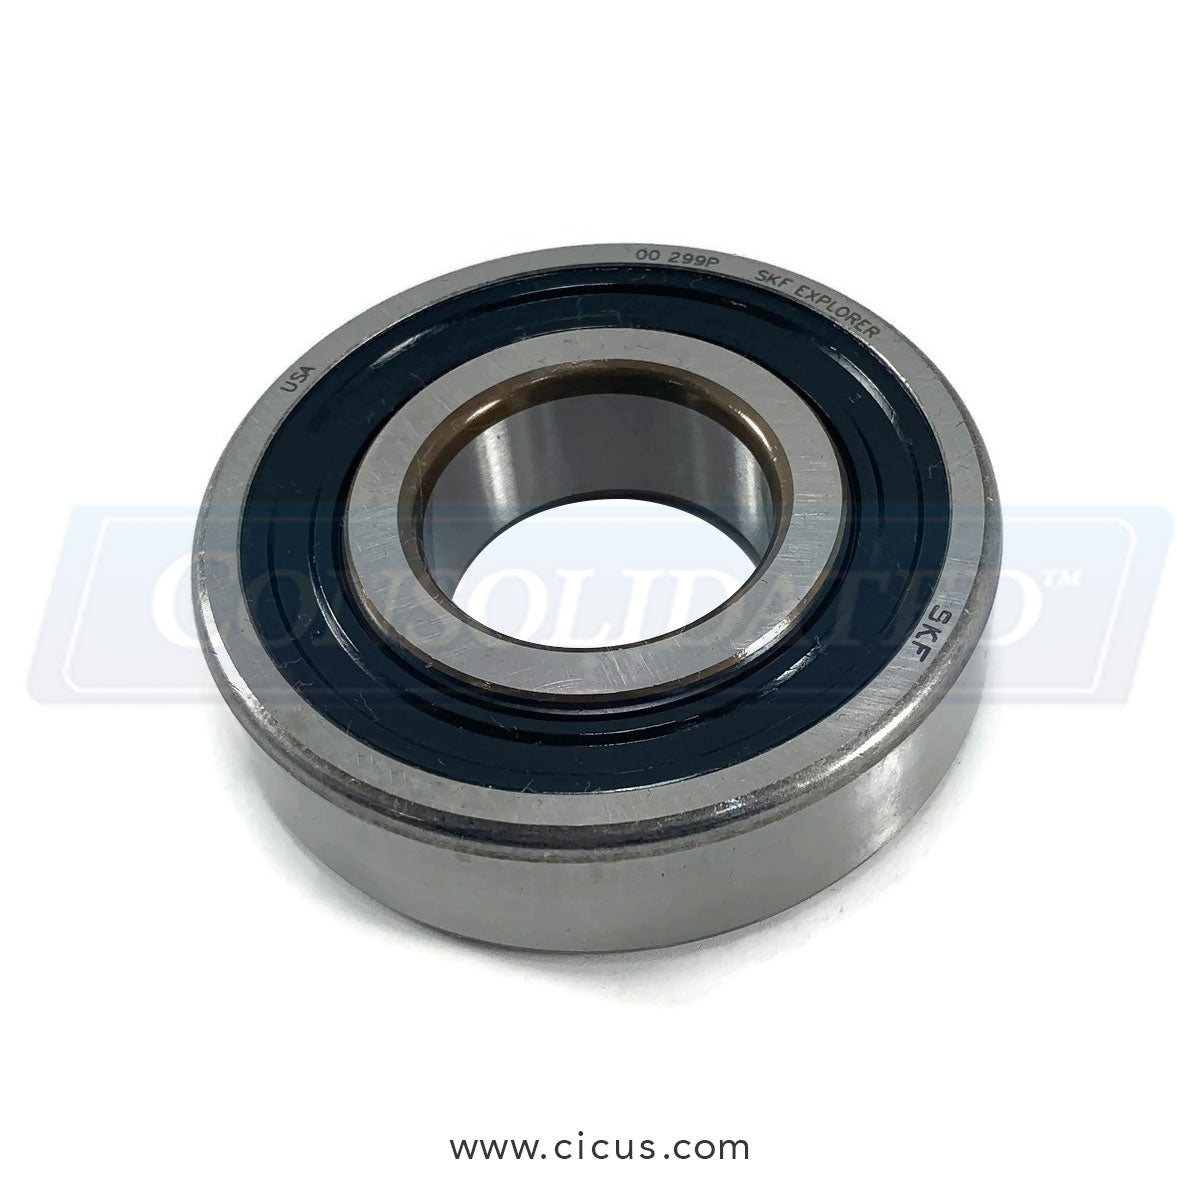 Alliance Laundry Systems Rear Bearing 6307 2RS C3 (F100136P)